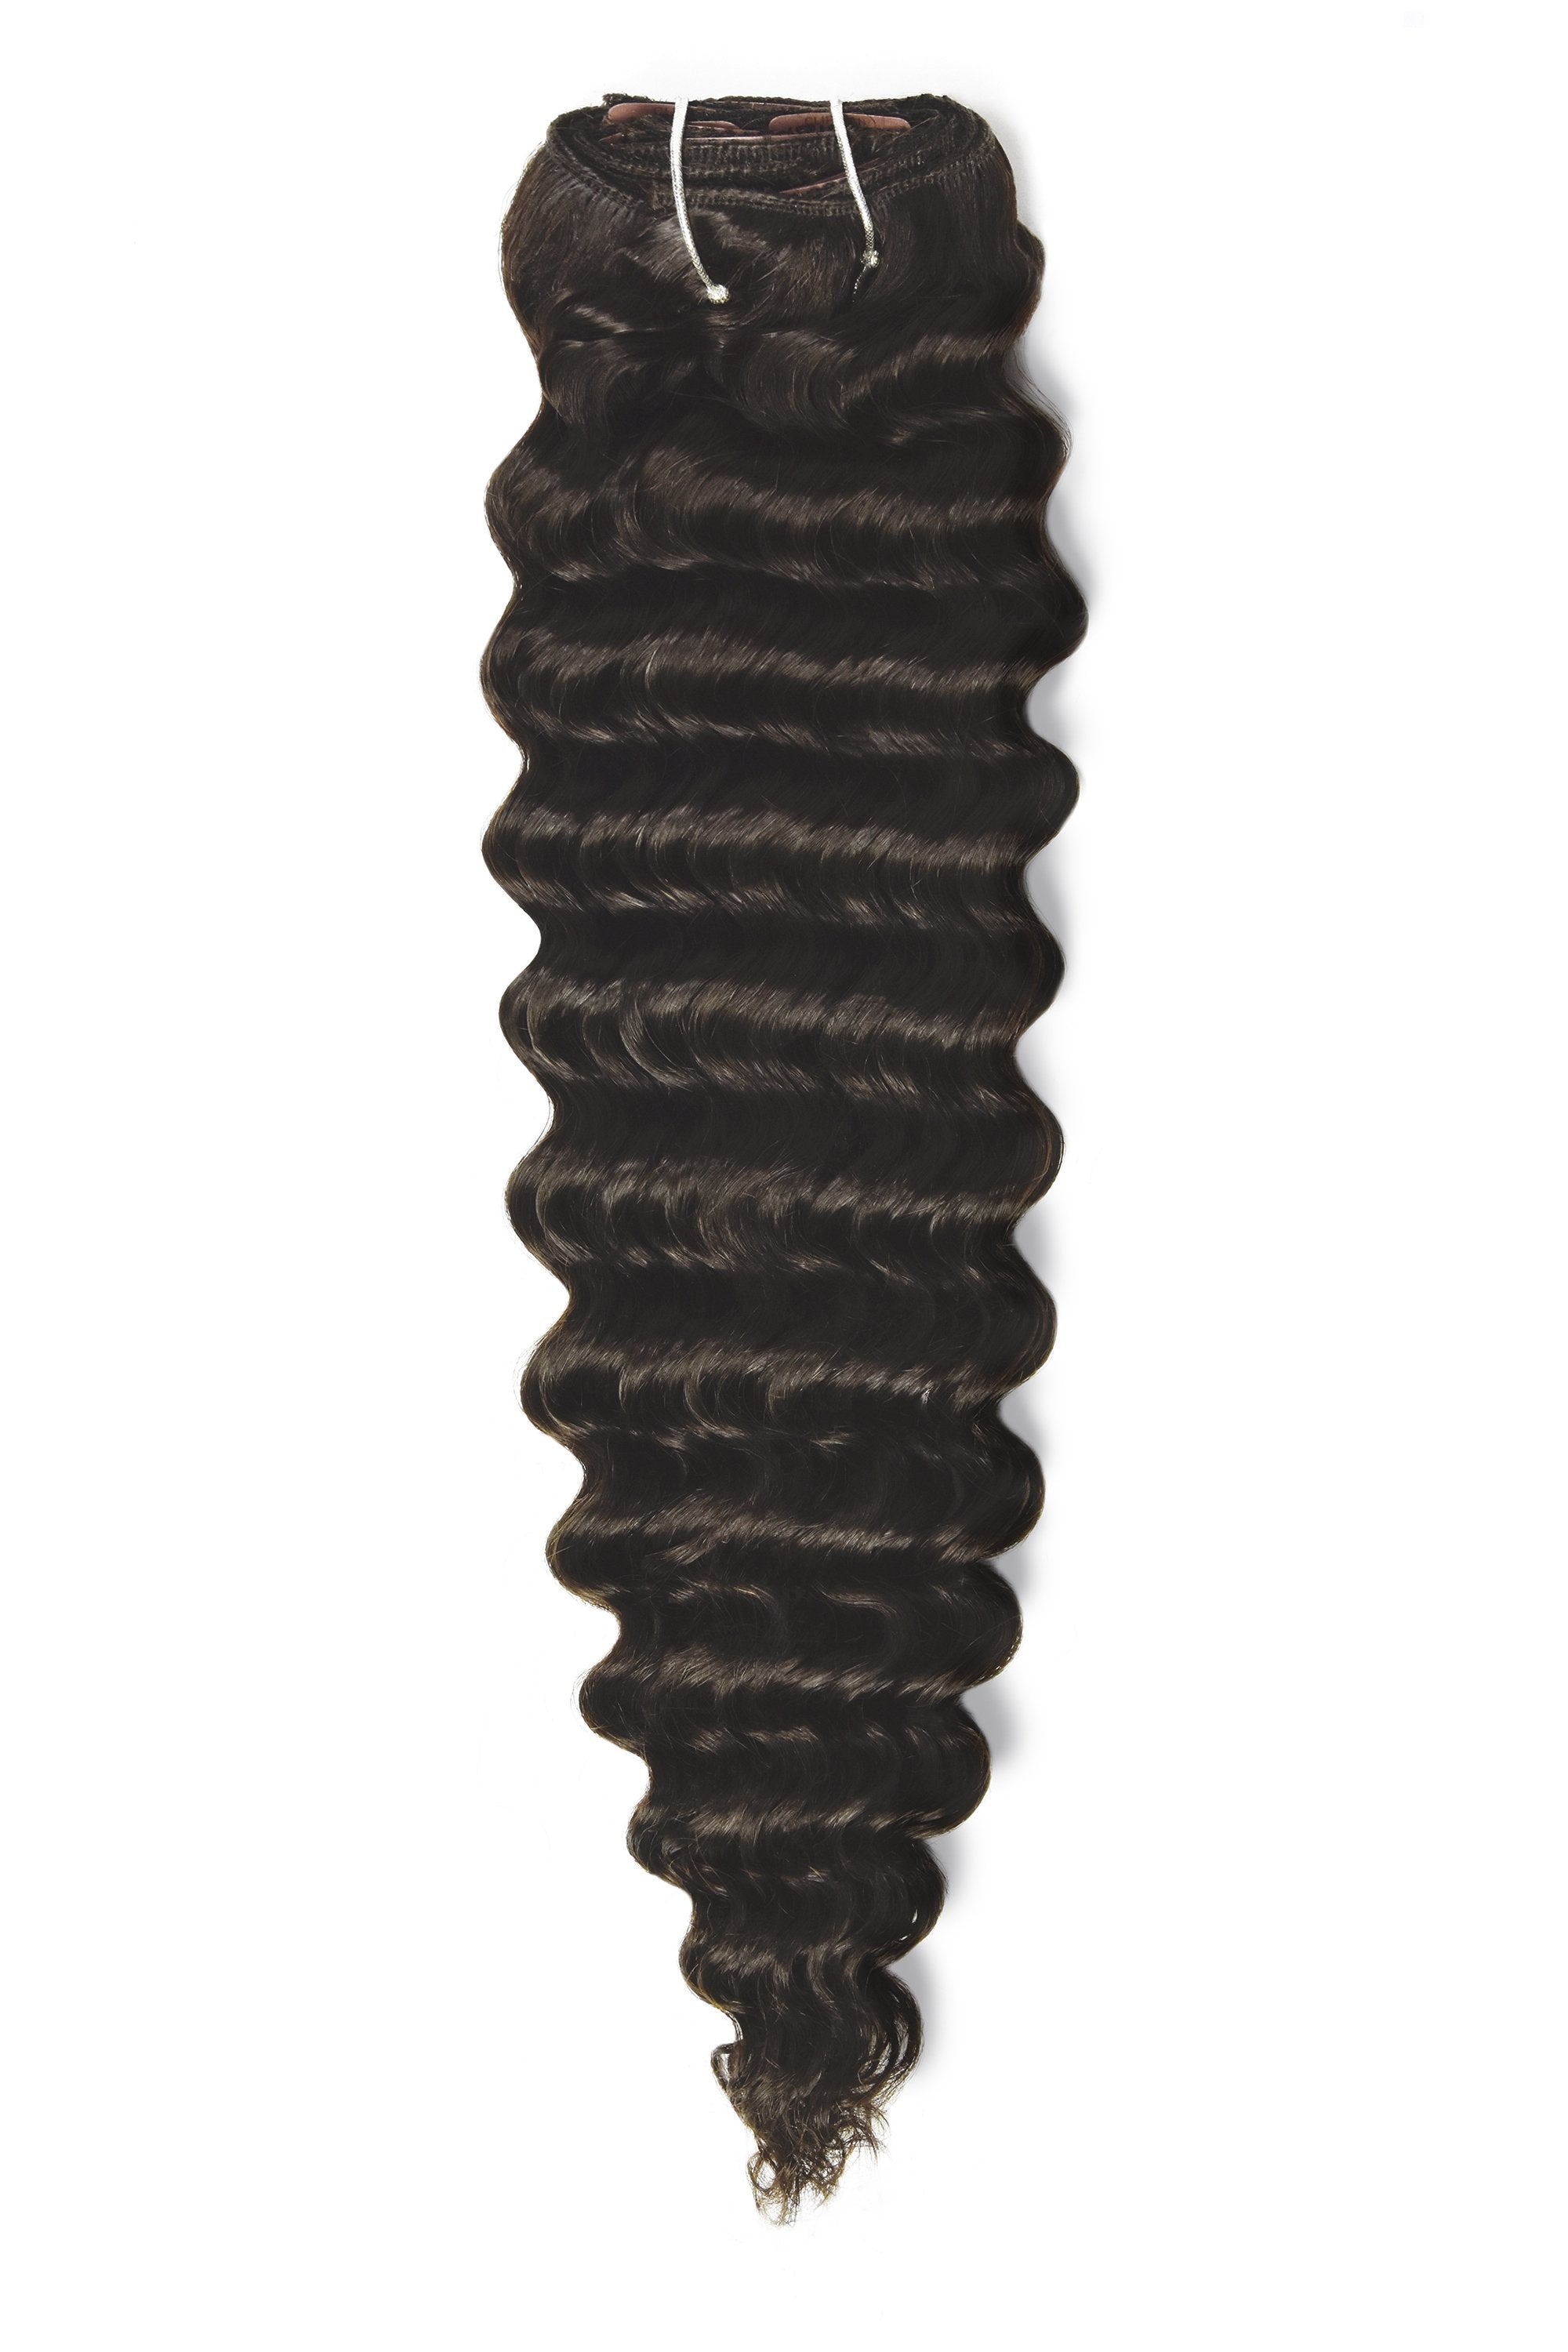 curly clip in hair extensions human hair by Cliphair. 1-2 Express Delivery In US. 